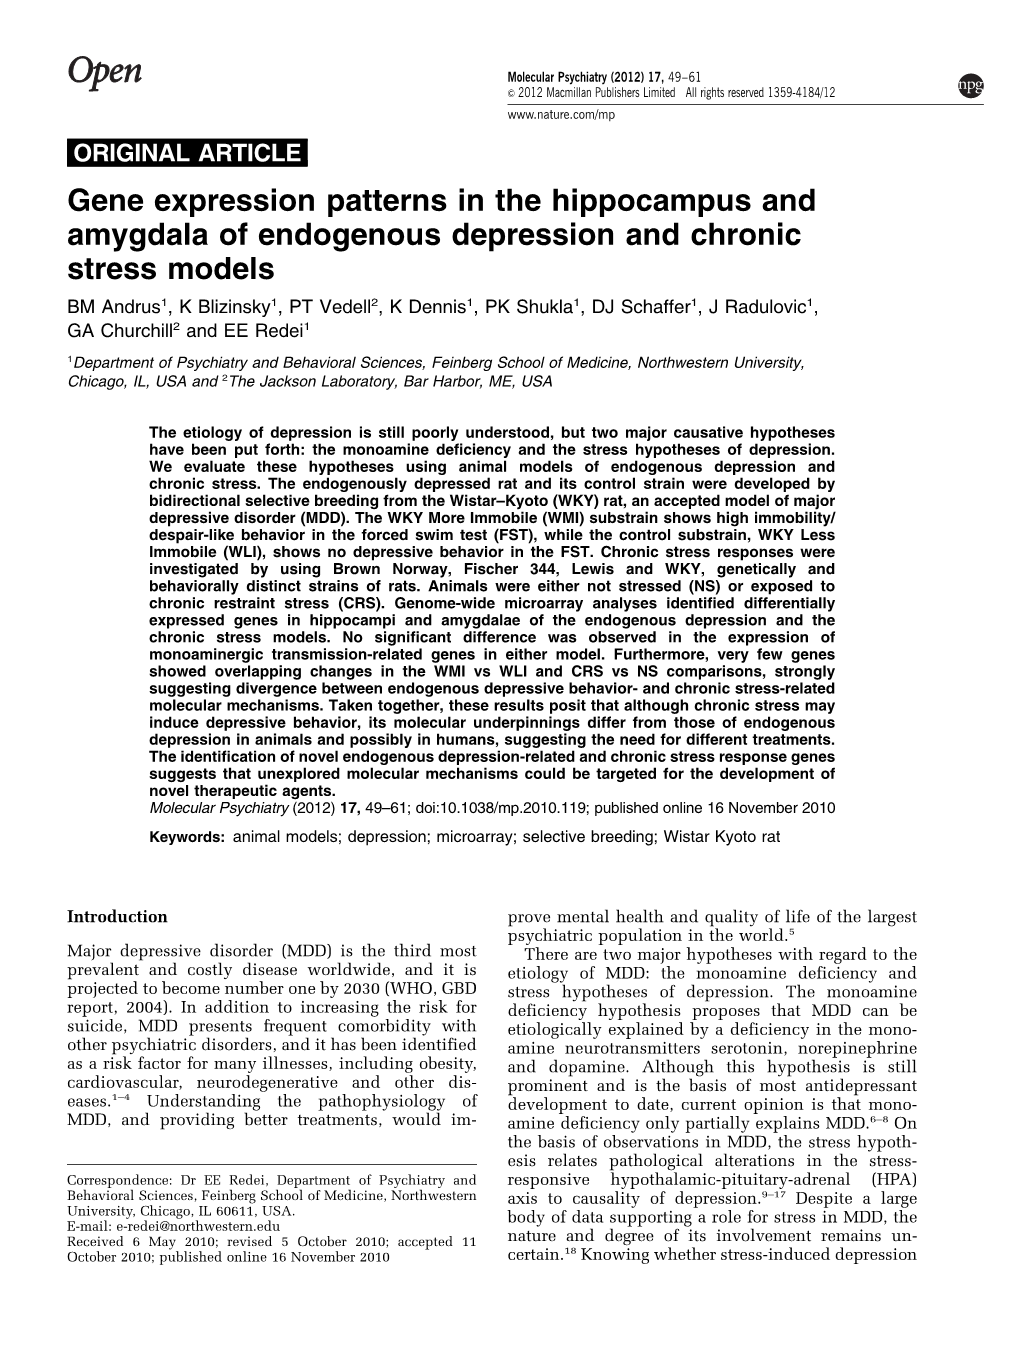 Gene Expression Patterns in the Hippocampus and Amygdala Of